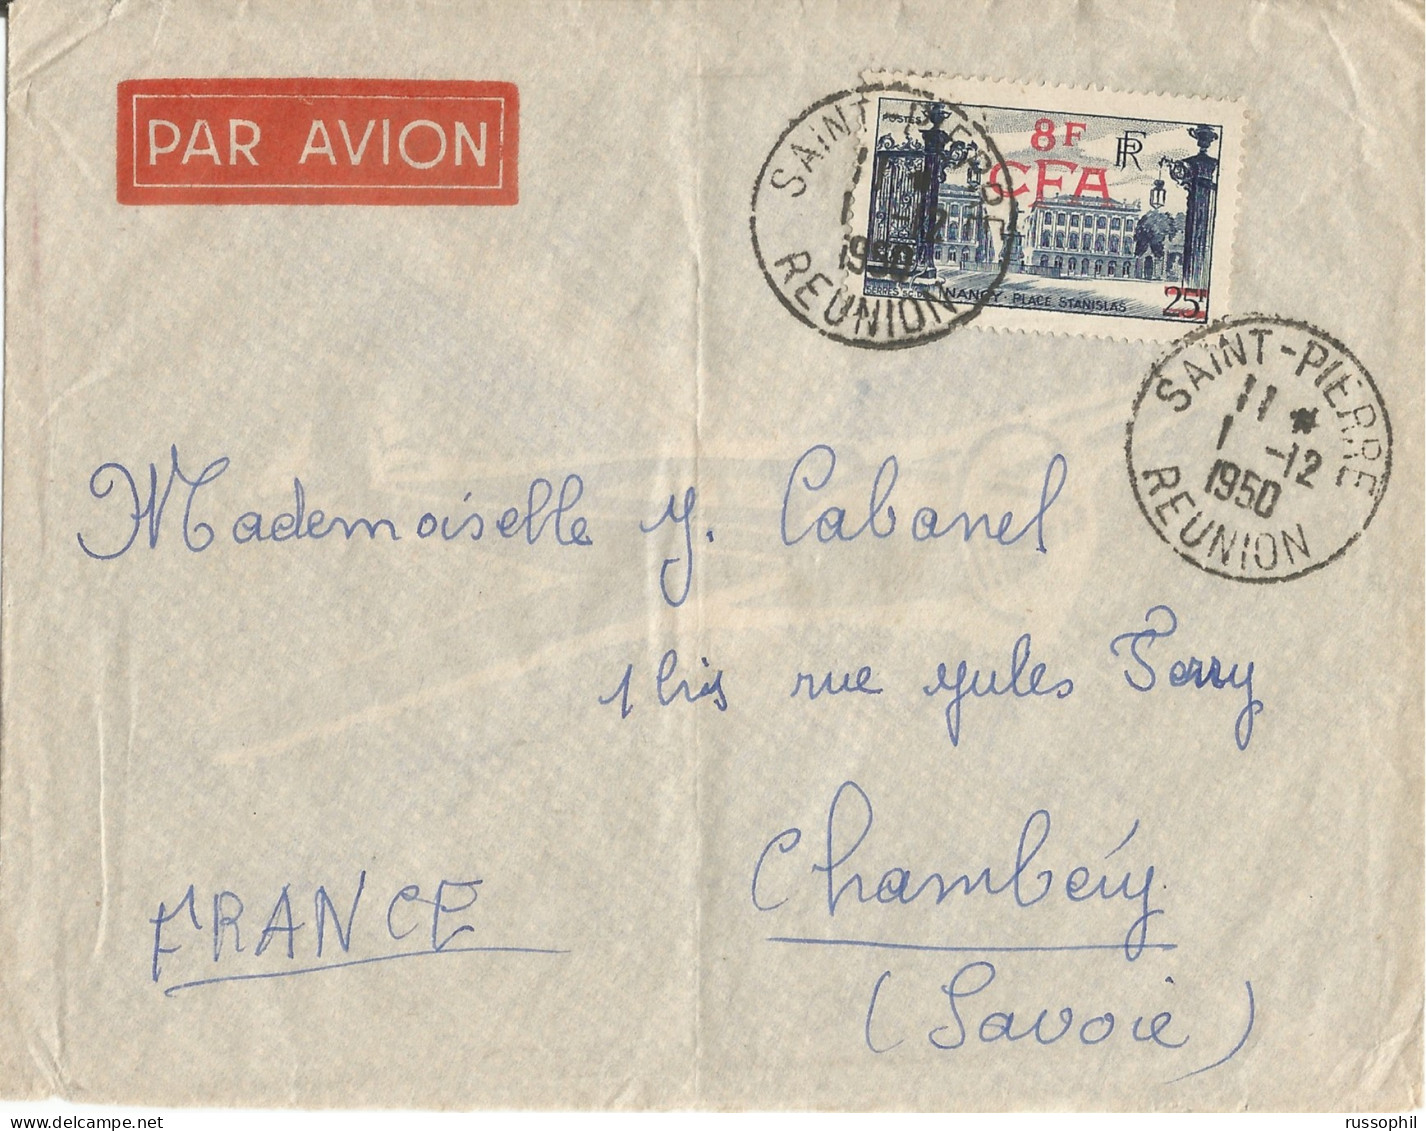 REUNION - OVERCHARGED 8 F CFA STAMP FRANKING AIR COVER FROM SAINT PIERRE TO MAINLAND FRANCE - 1950  - Covers & Documents